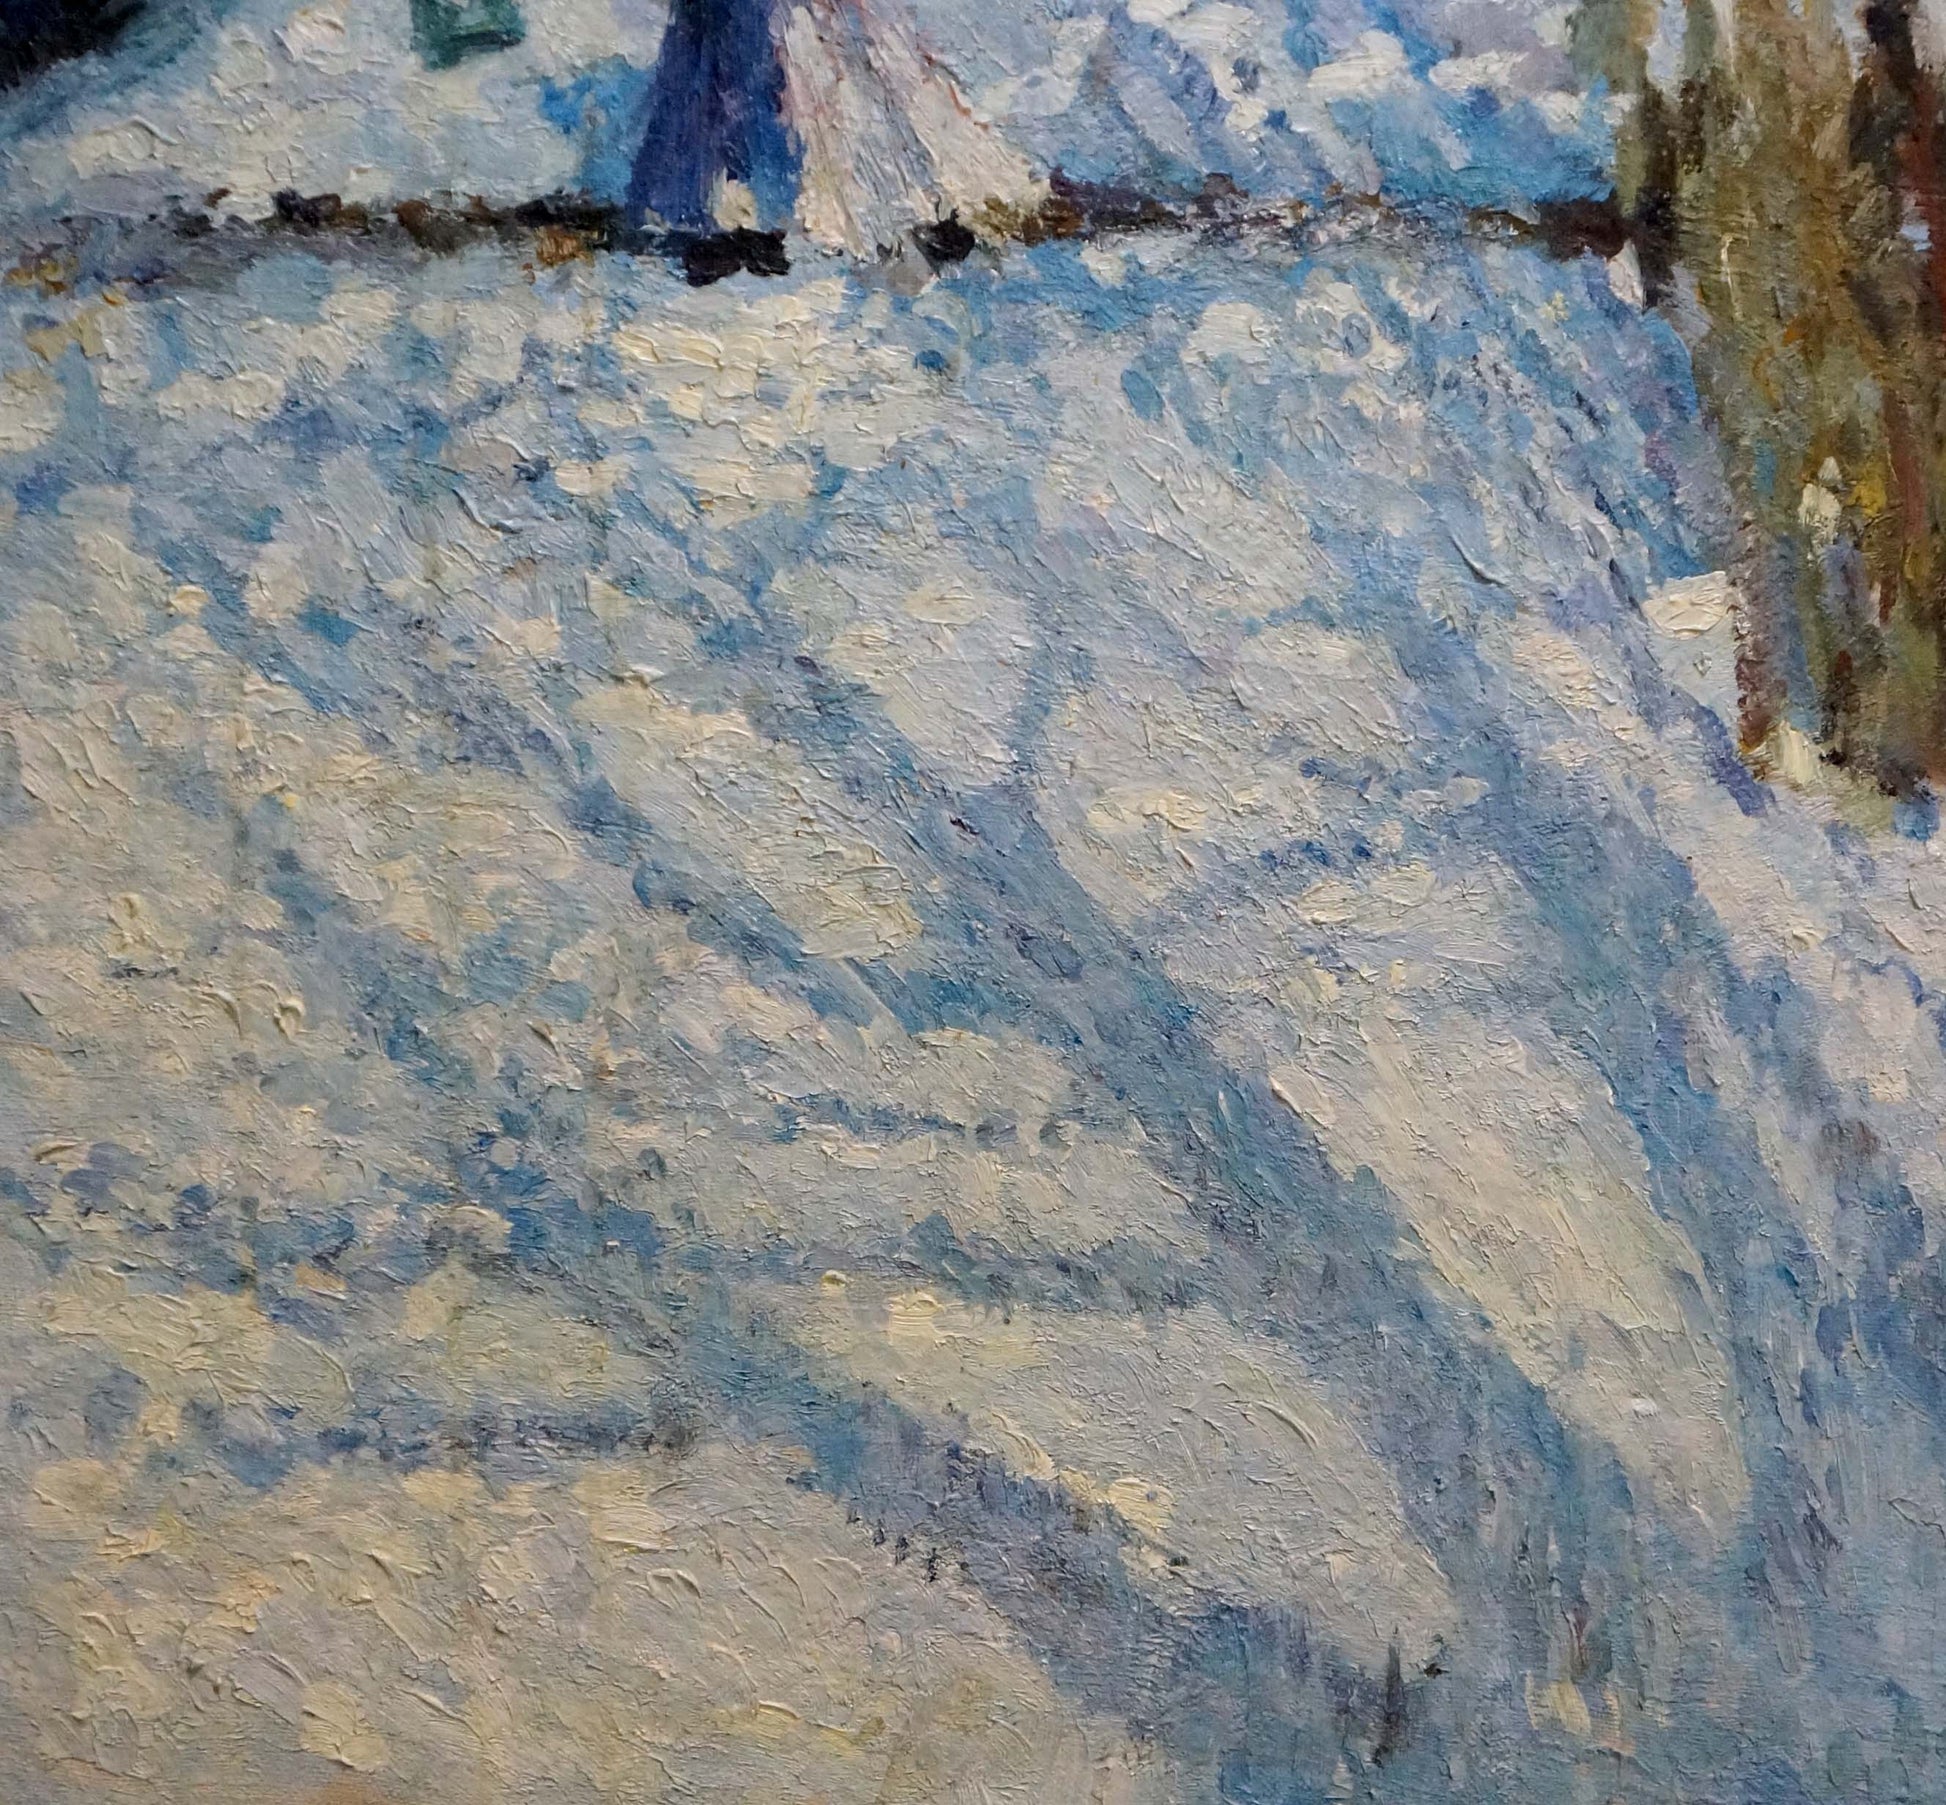 A Girl Walks to a Well in Winter, an oil painting by an unknown artist